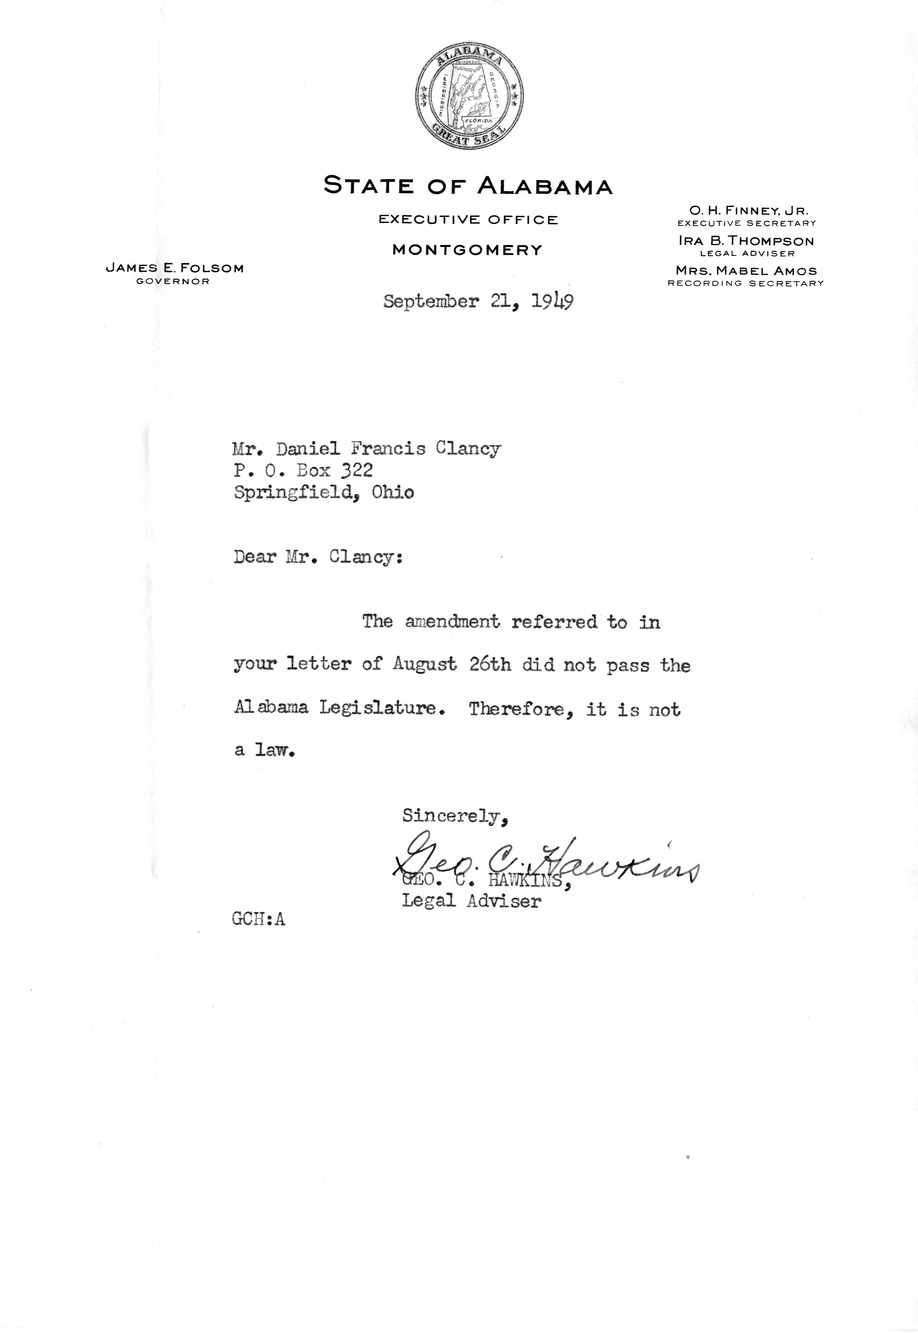 Letter from George C. Hawkins to Daniel C. Clancy